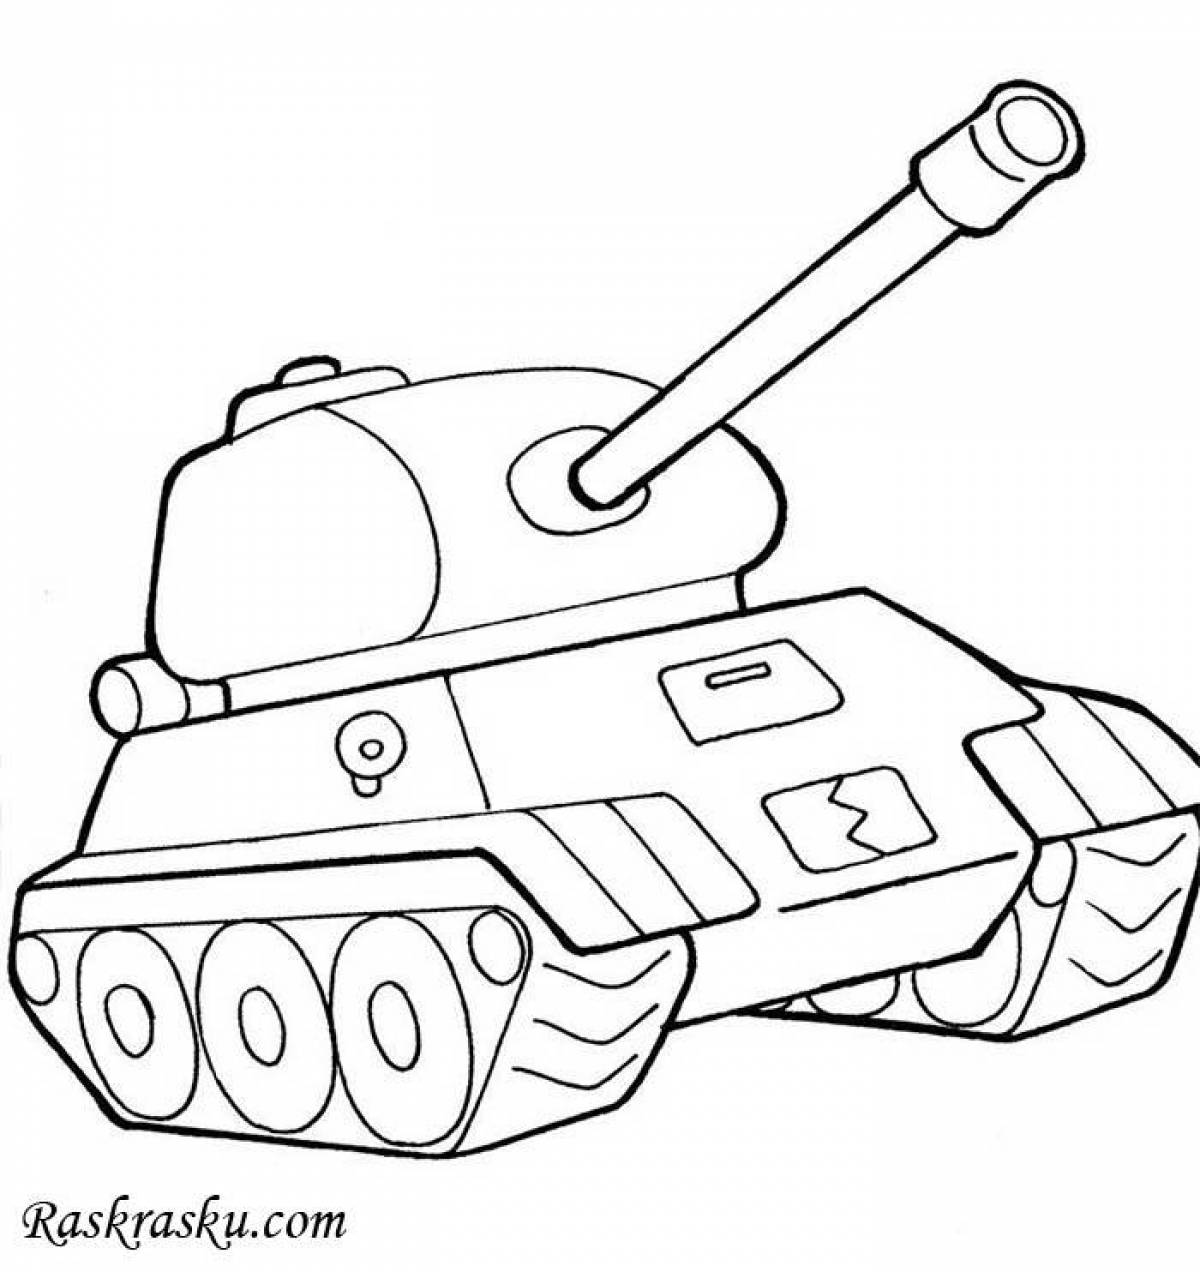 Creative tank coloring pages for 5-6 year olds